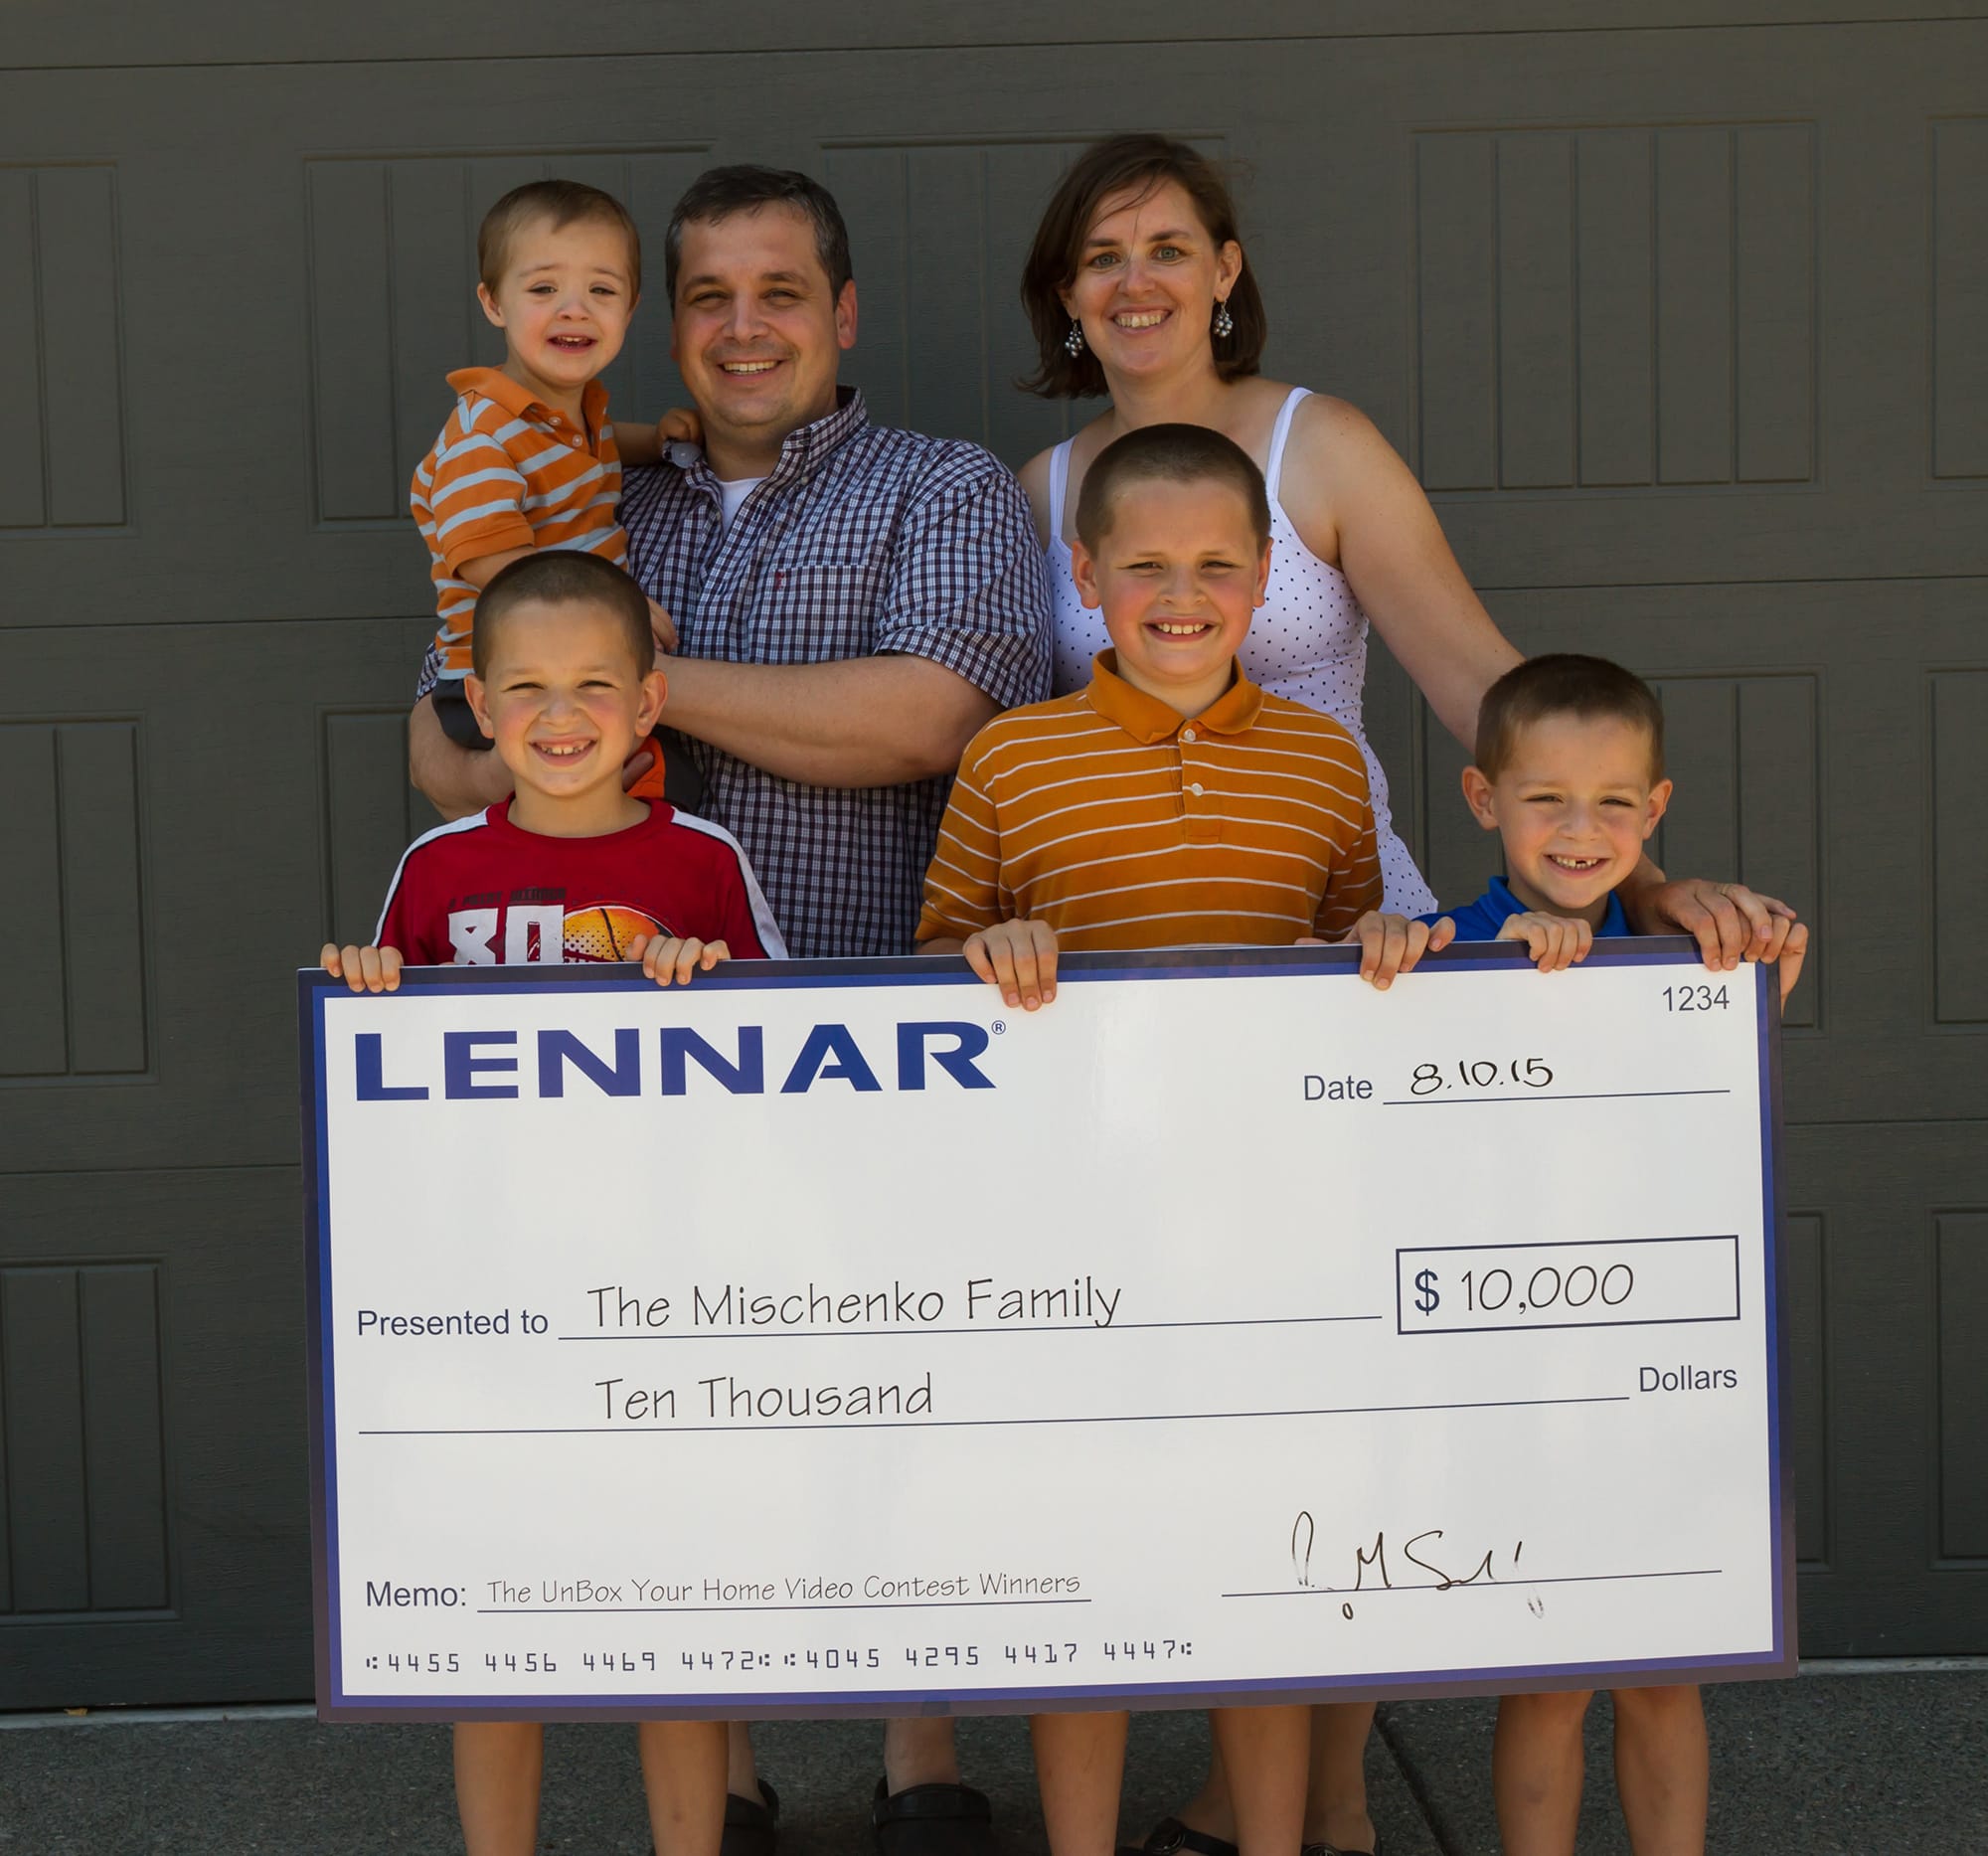 Orchards: The Mischenko family won $10,000 as part of the Unbox Your Home video contest after filming their first moments in their new home, built by developer Lennar Corp. Back row, from left: Seth, Craig and Grace Mischenko. Front row, from left: Timothy, Micah and Joseph Mischenko.